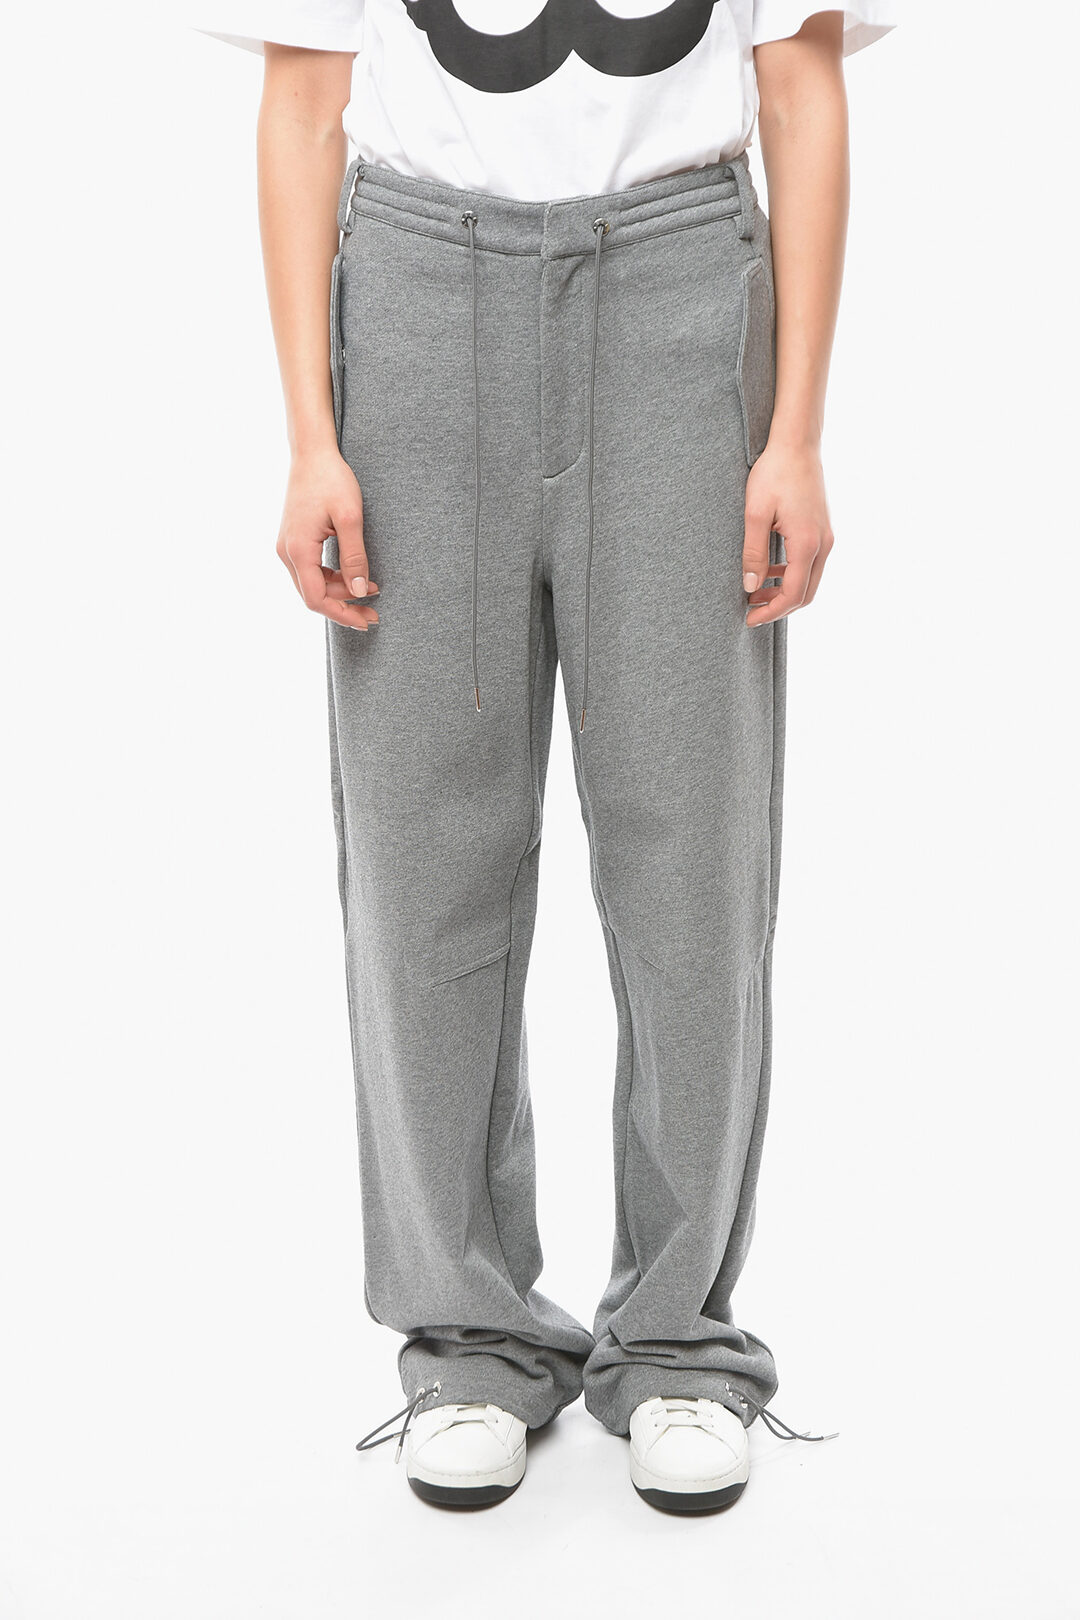 Dion Lee 3 Pockets TERRY SweatPants with Belt Loops women - Glamood Outlet